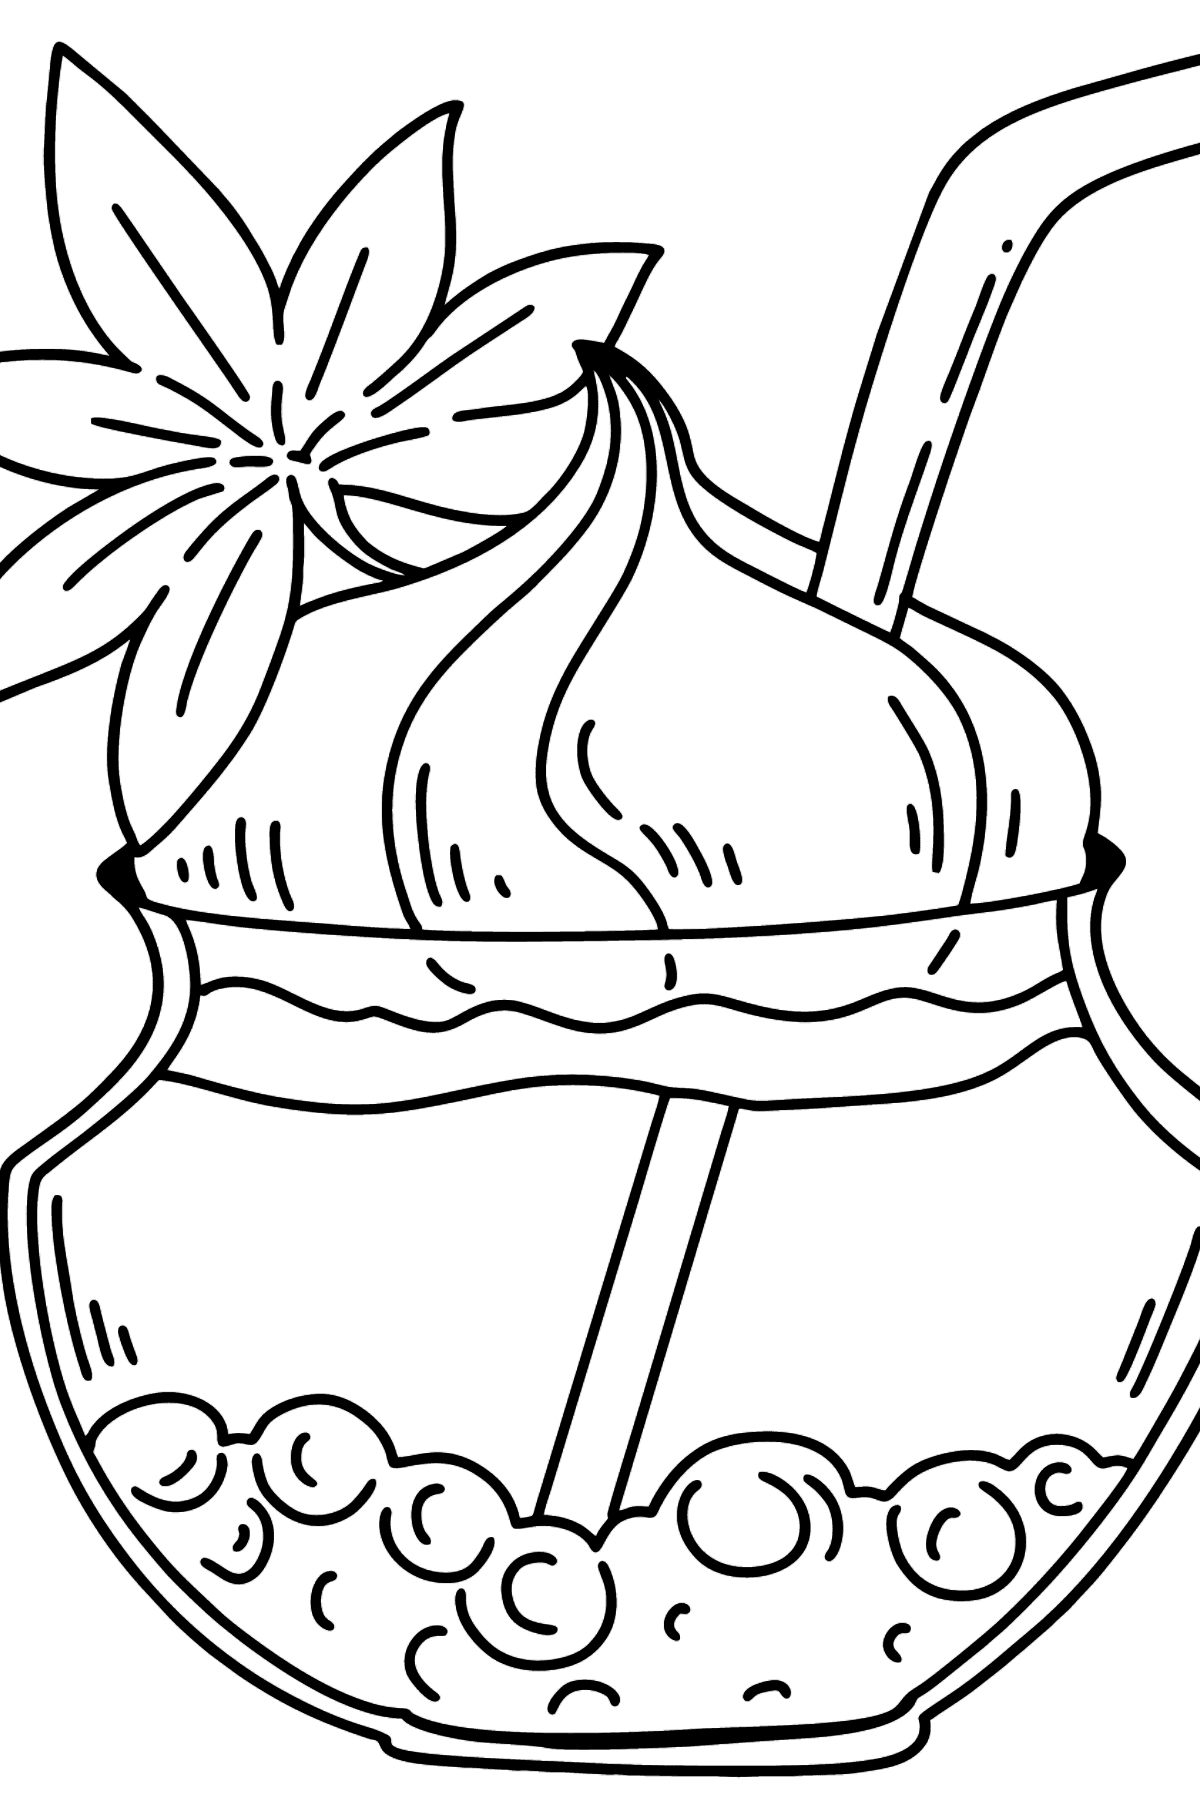 Tapioca coloring page - Coloring Pages for Kids